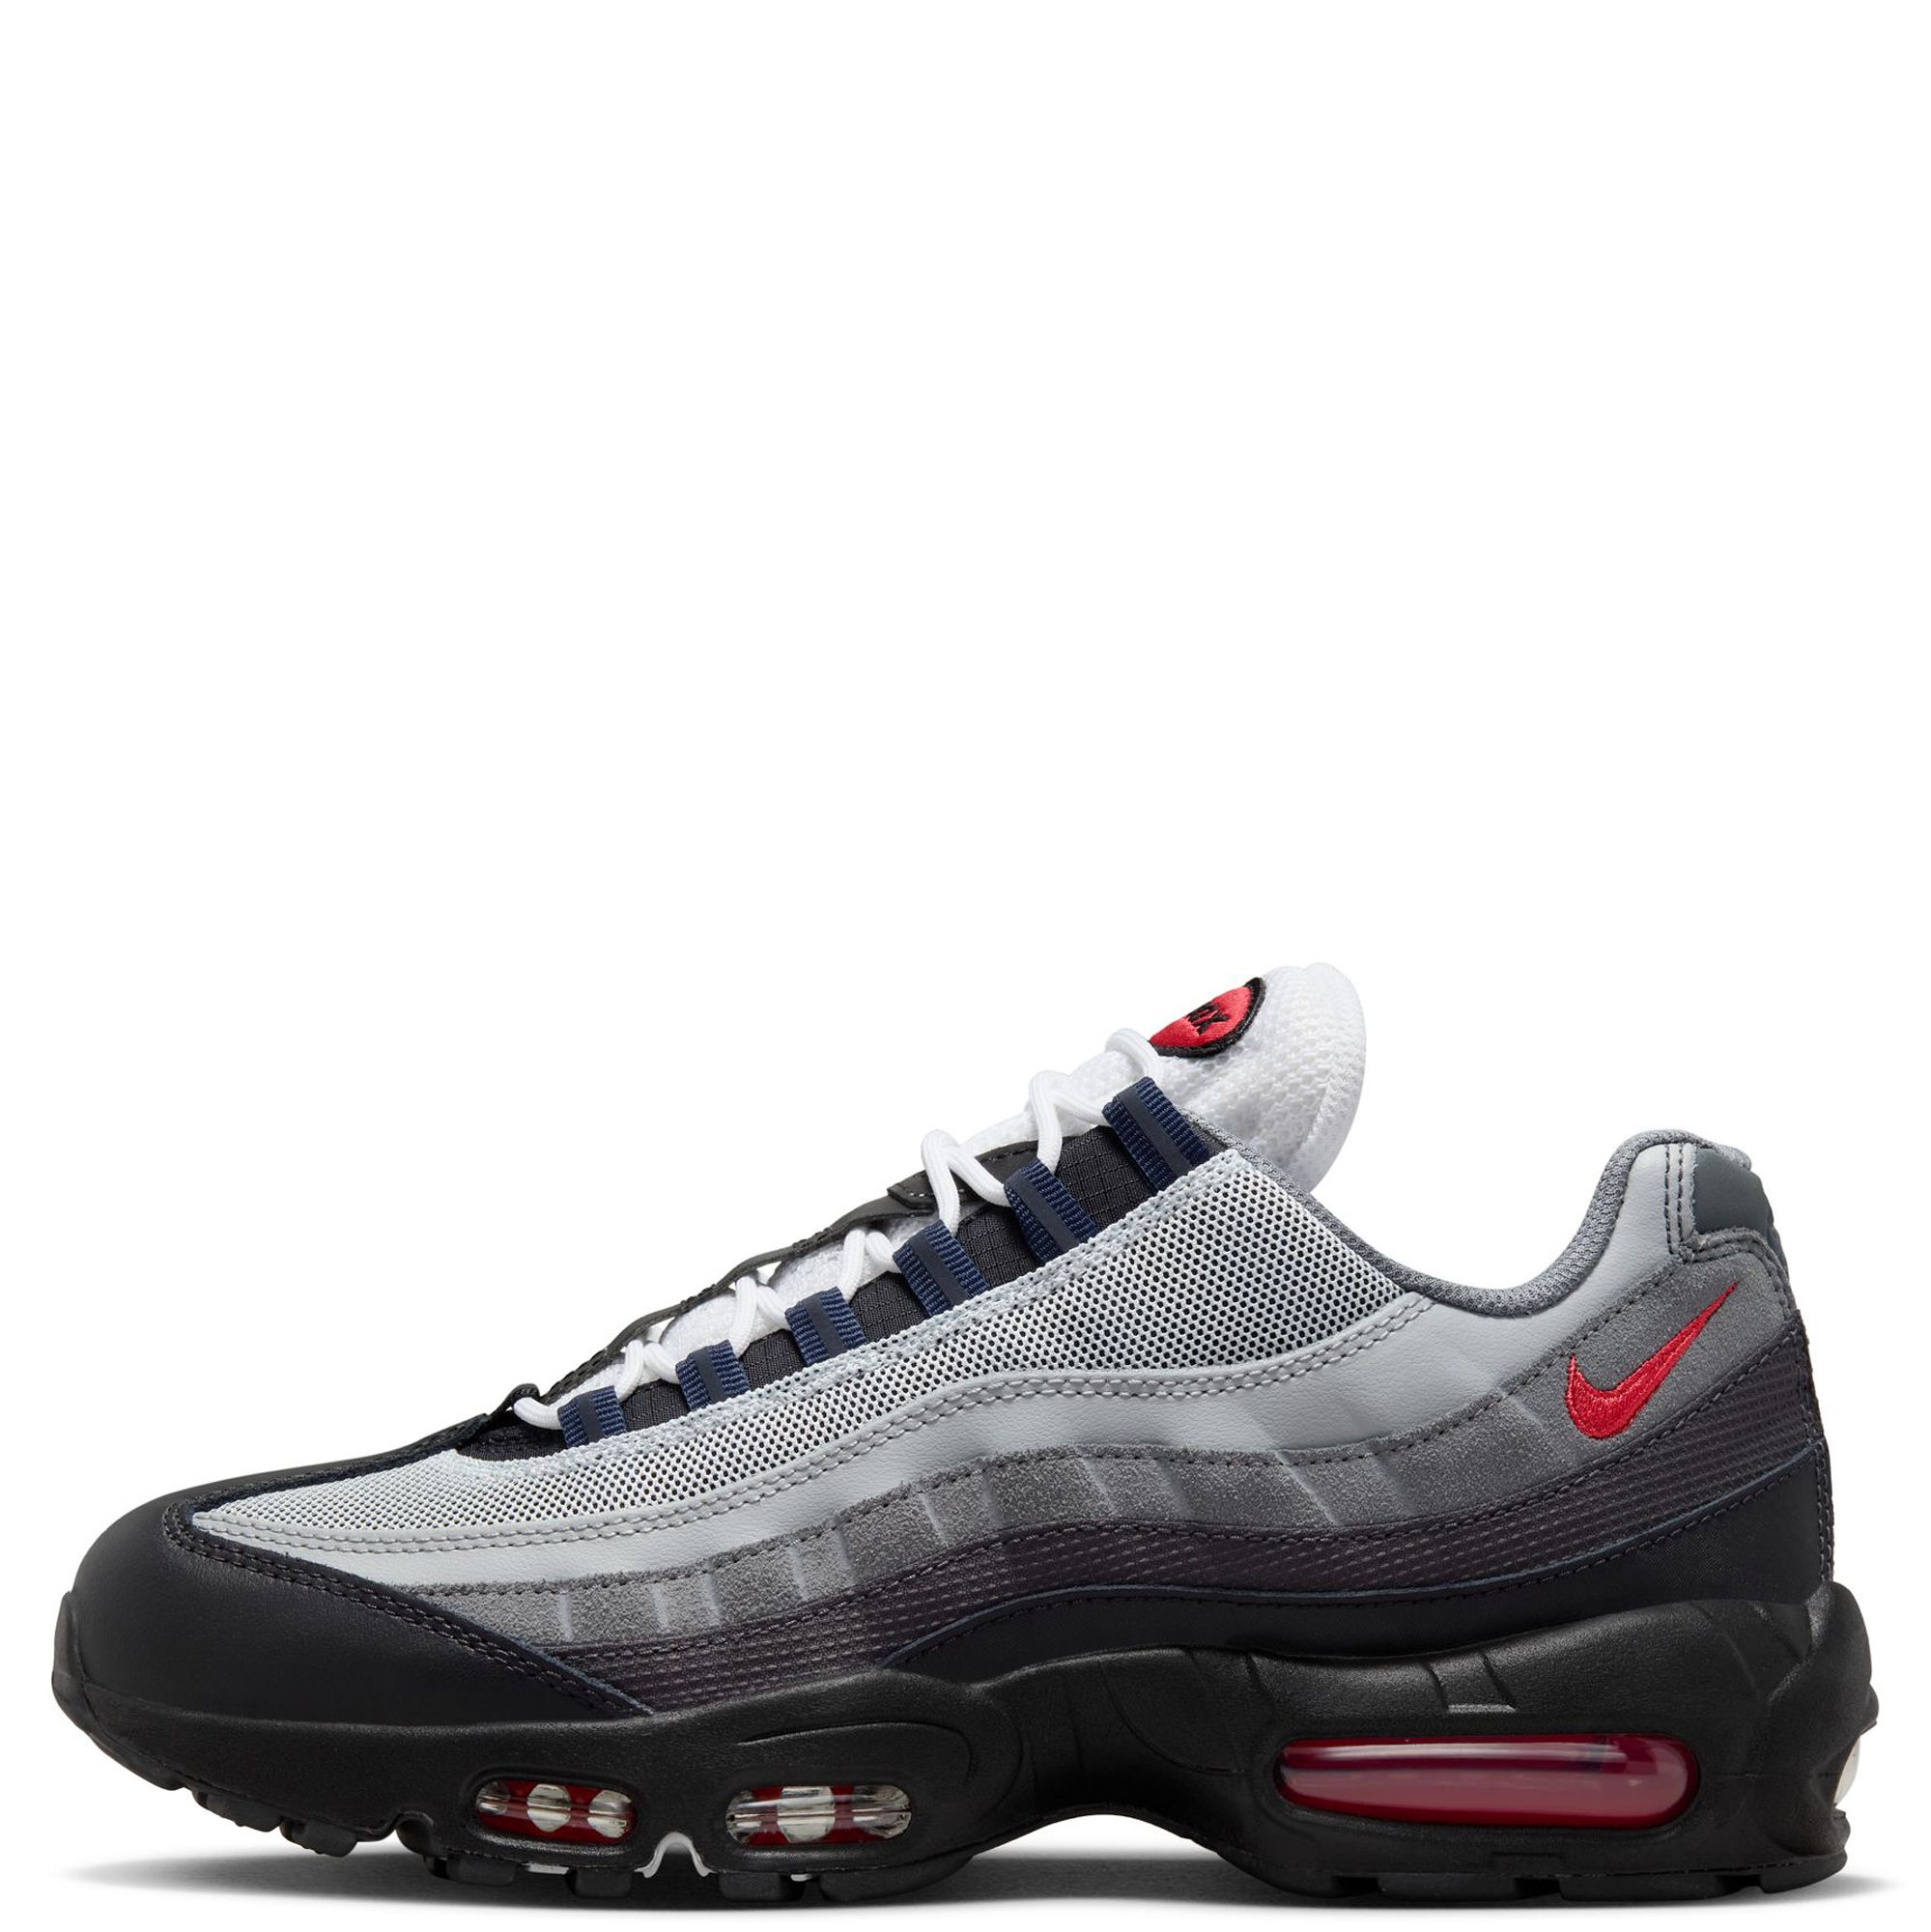 Men's shoes Nike Air Max 95 Black/ Track Red-Anthracite-Smoke Grey